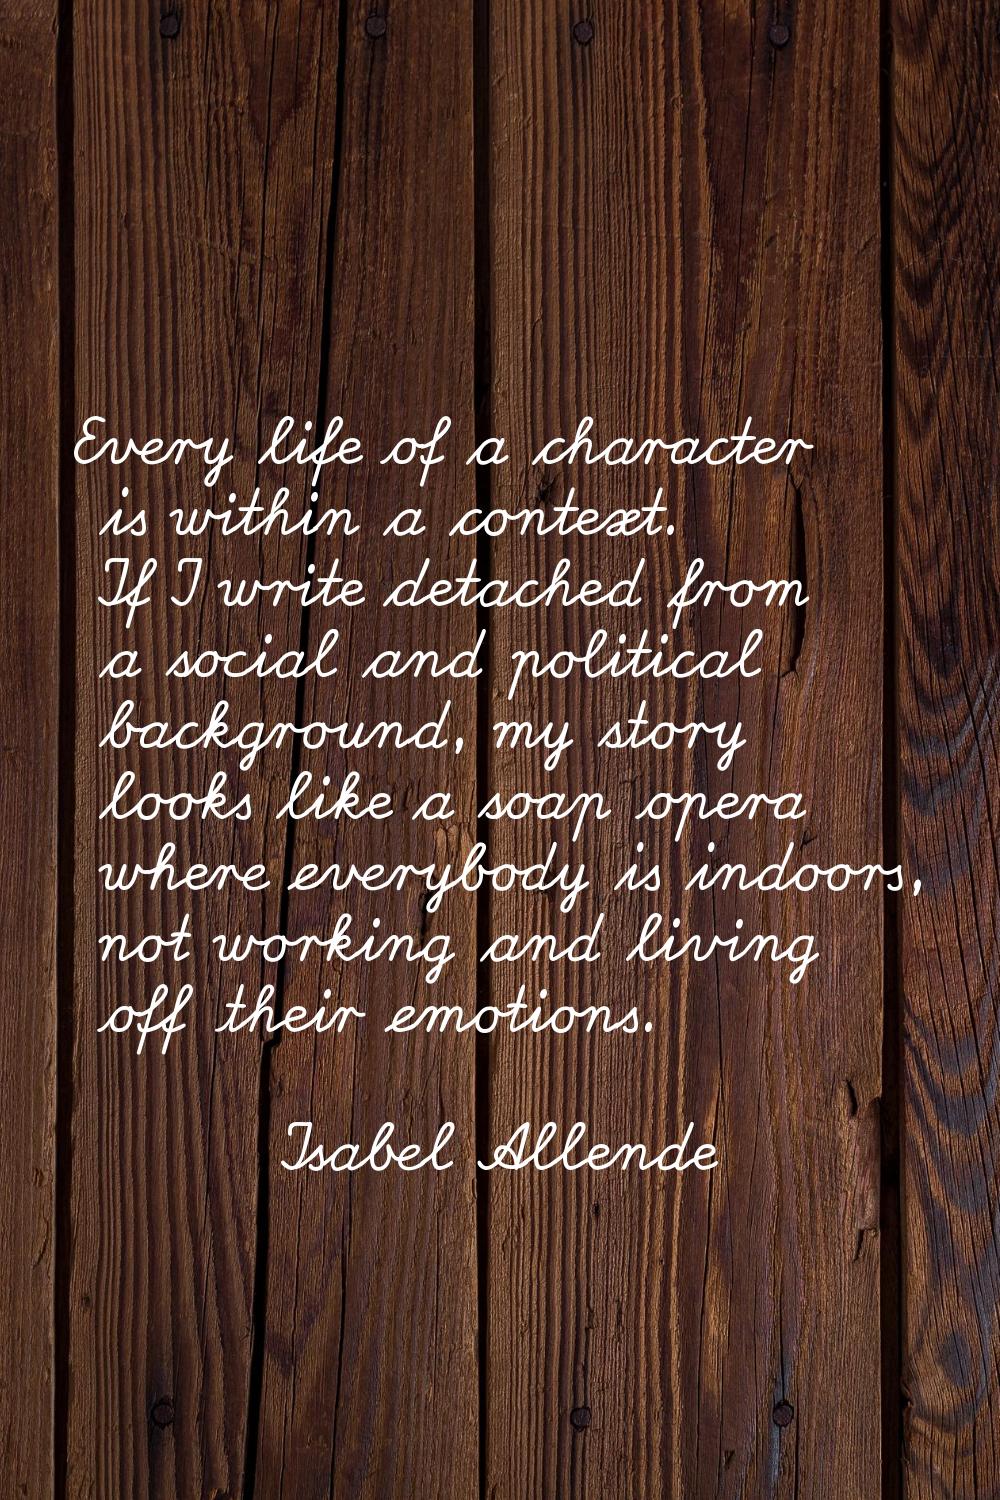 Every life of a character is within a context. If I write detached from a social and political back